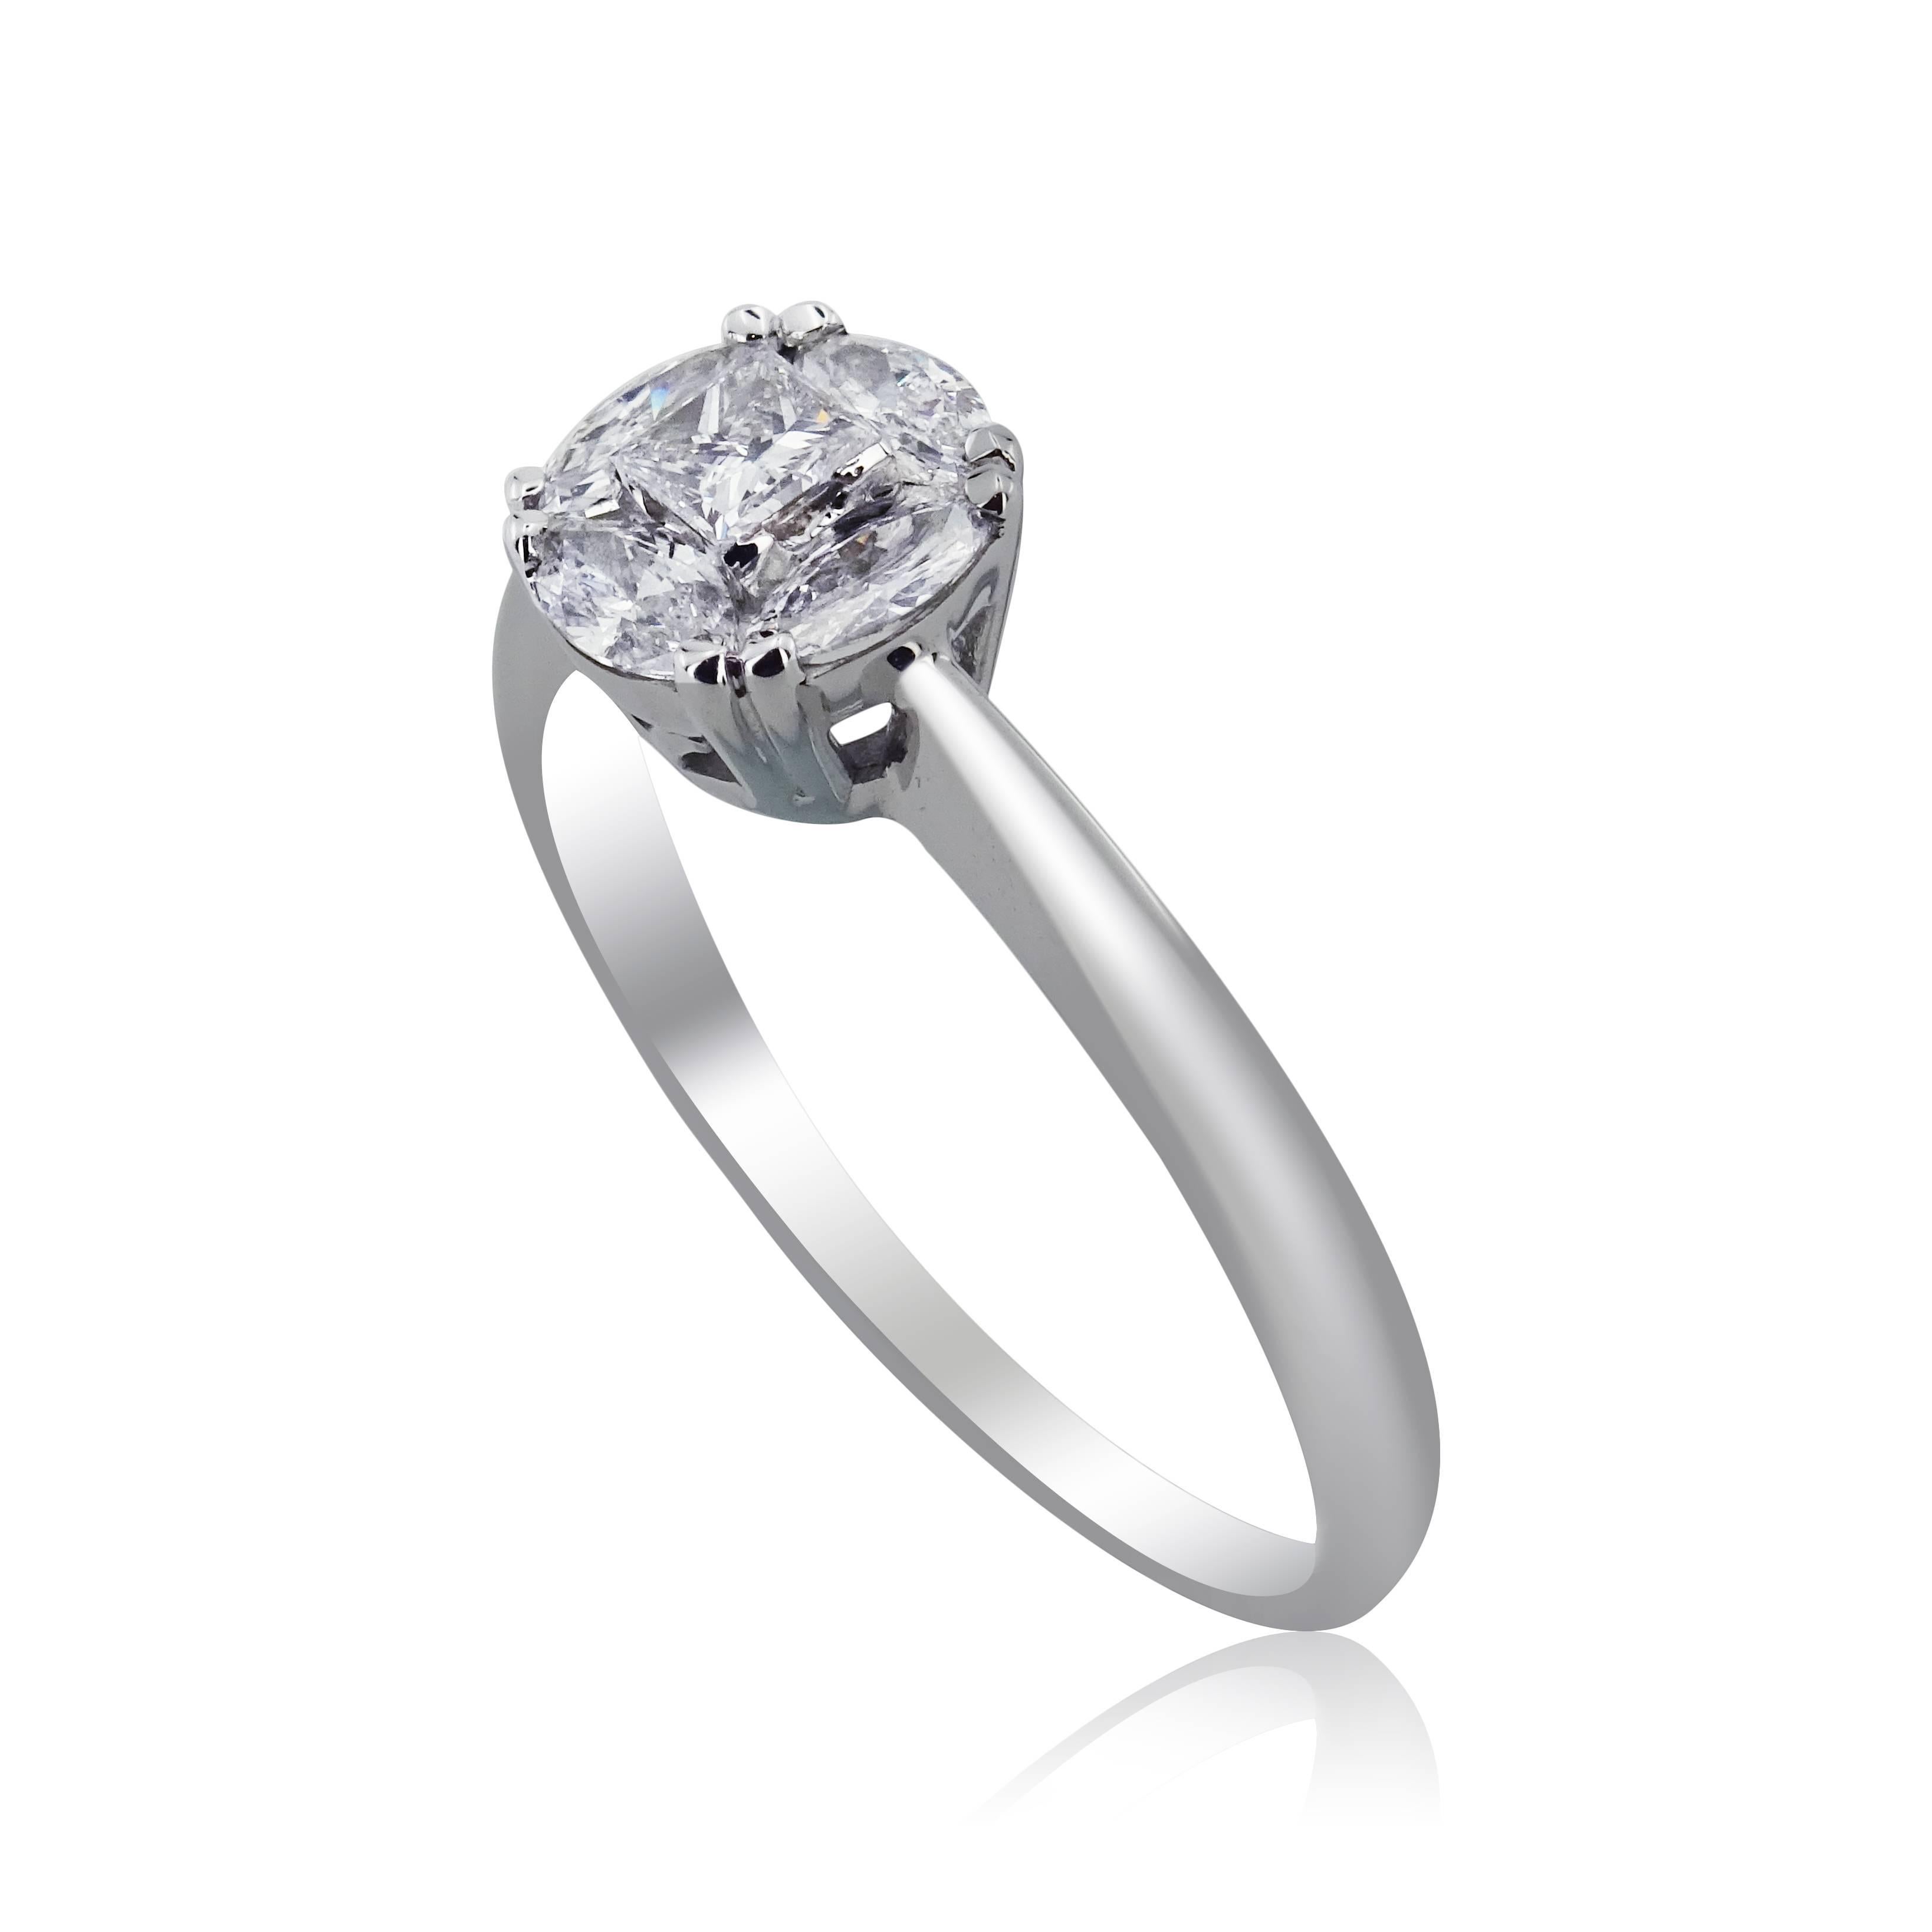 WHITE GOLD PRINCESS AND MARQUISE DIAMOND ENGAGEMENT RING

Set in 18K White Gold


Total diamond weight: 0.46 ct


Color: G


Clarity: VS-SI


Total ring weight: 2.83 grams